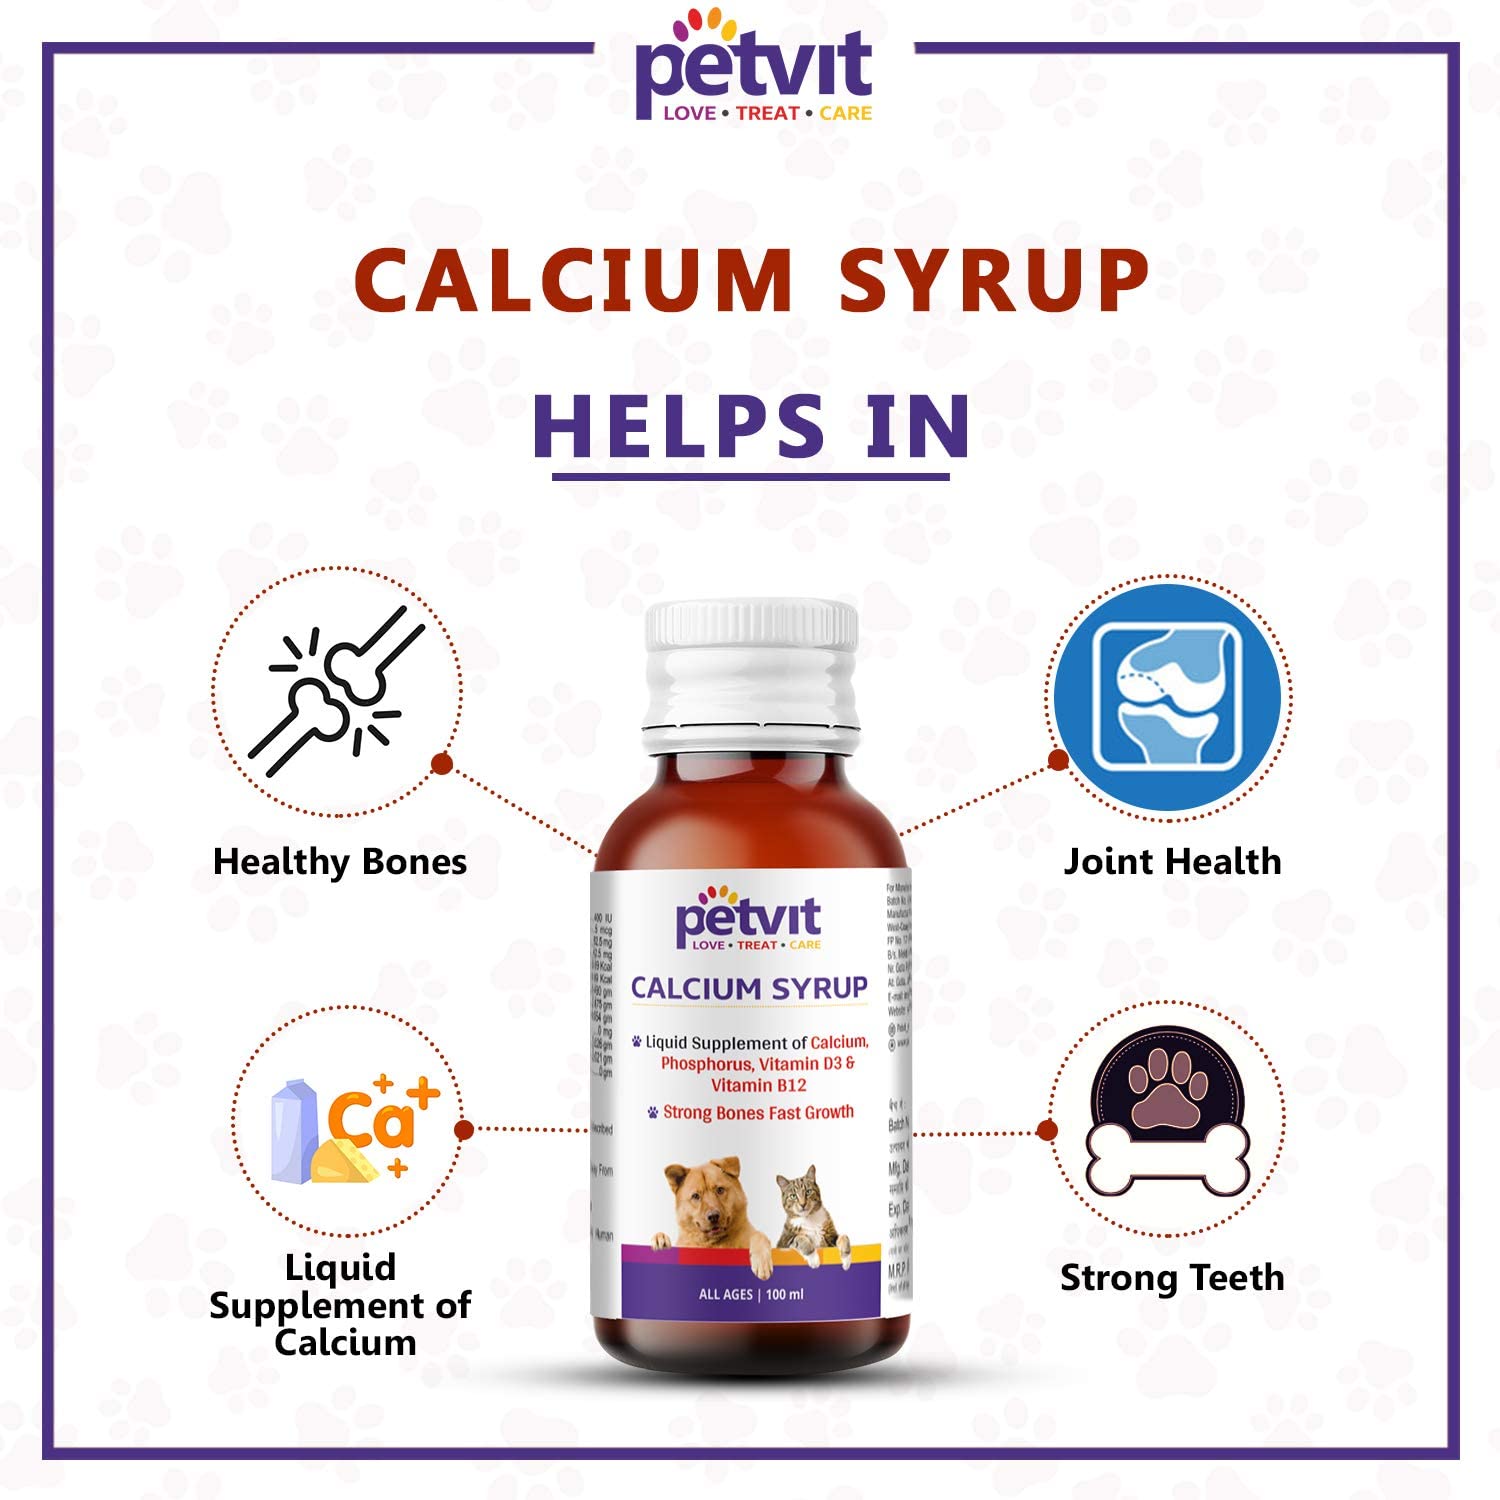 Petvit Calcium Syrup with Calcium, Phosphorus, Vitamin D3 & B12 for Dog Stronger Bones, Teeth & Growth in Pet for All Age Group – 100ml